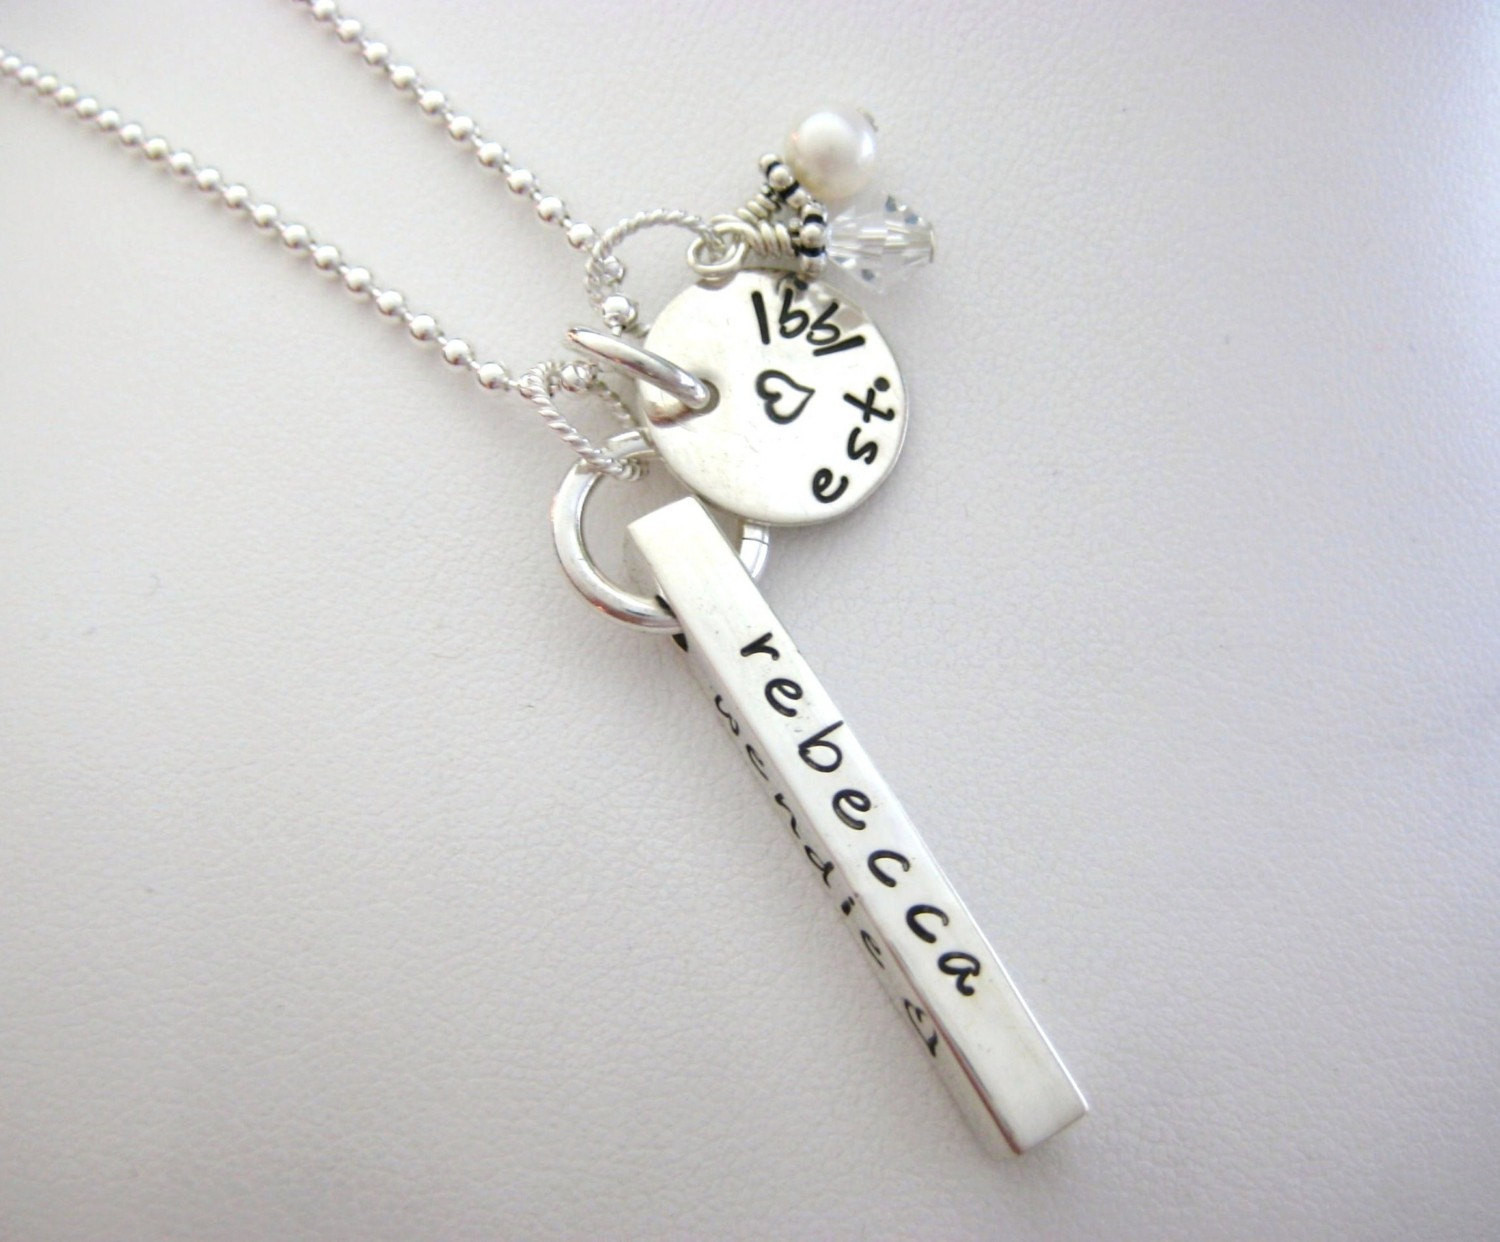 Sterling Silver Bar Necklace Personalized
 Personalized Sterling Silver Bar Necklace with Charm